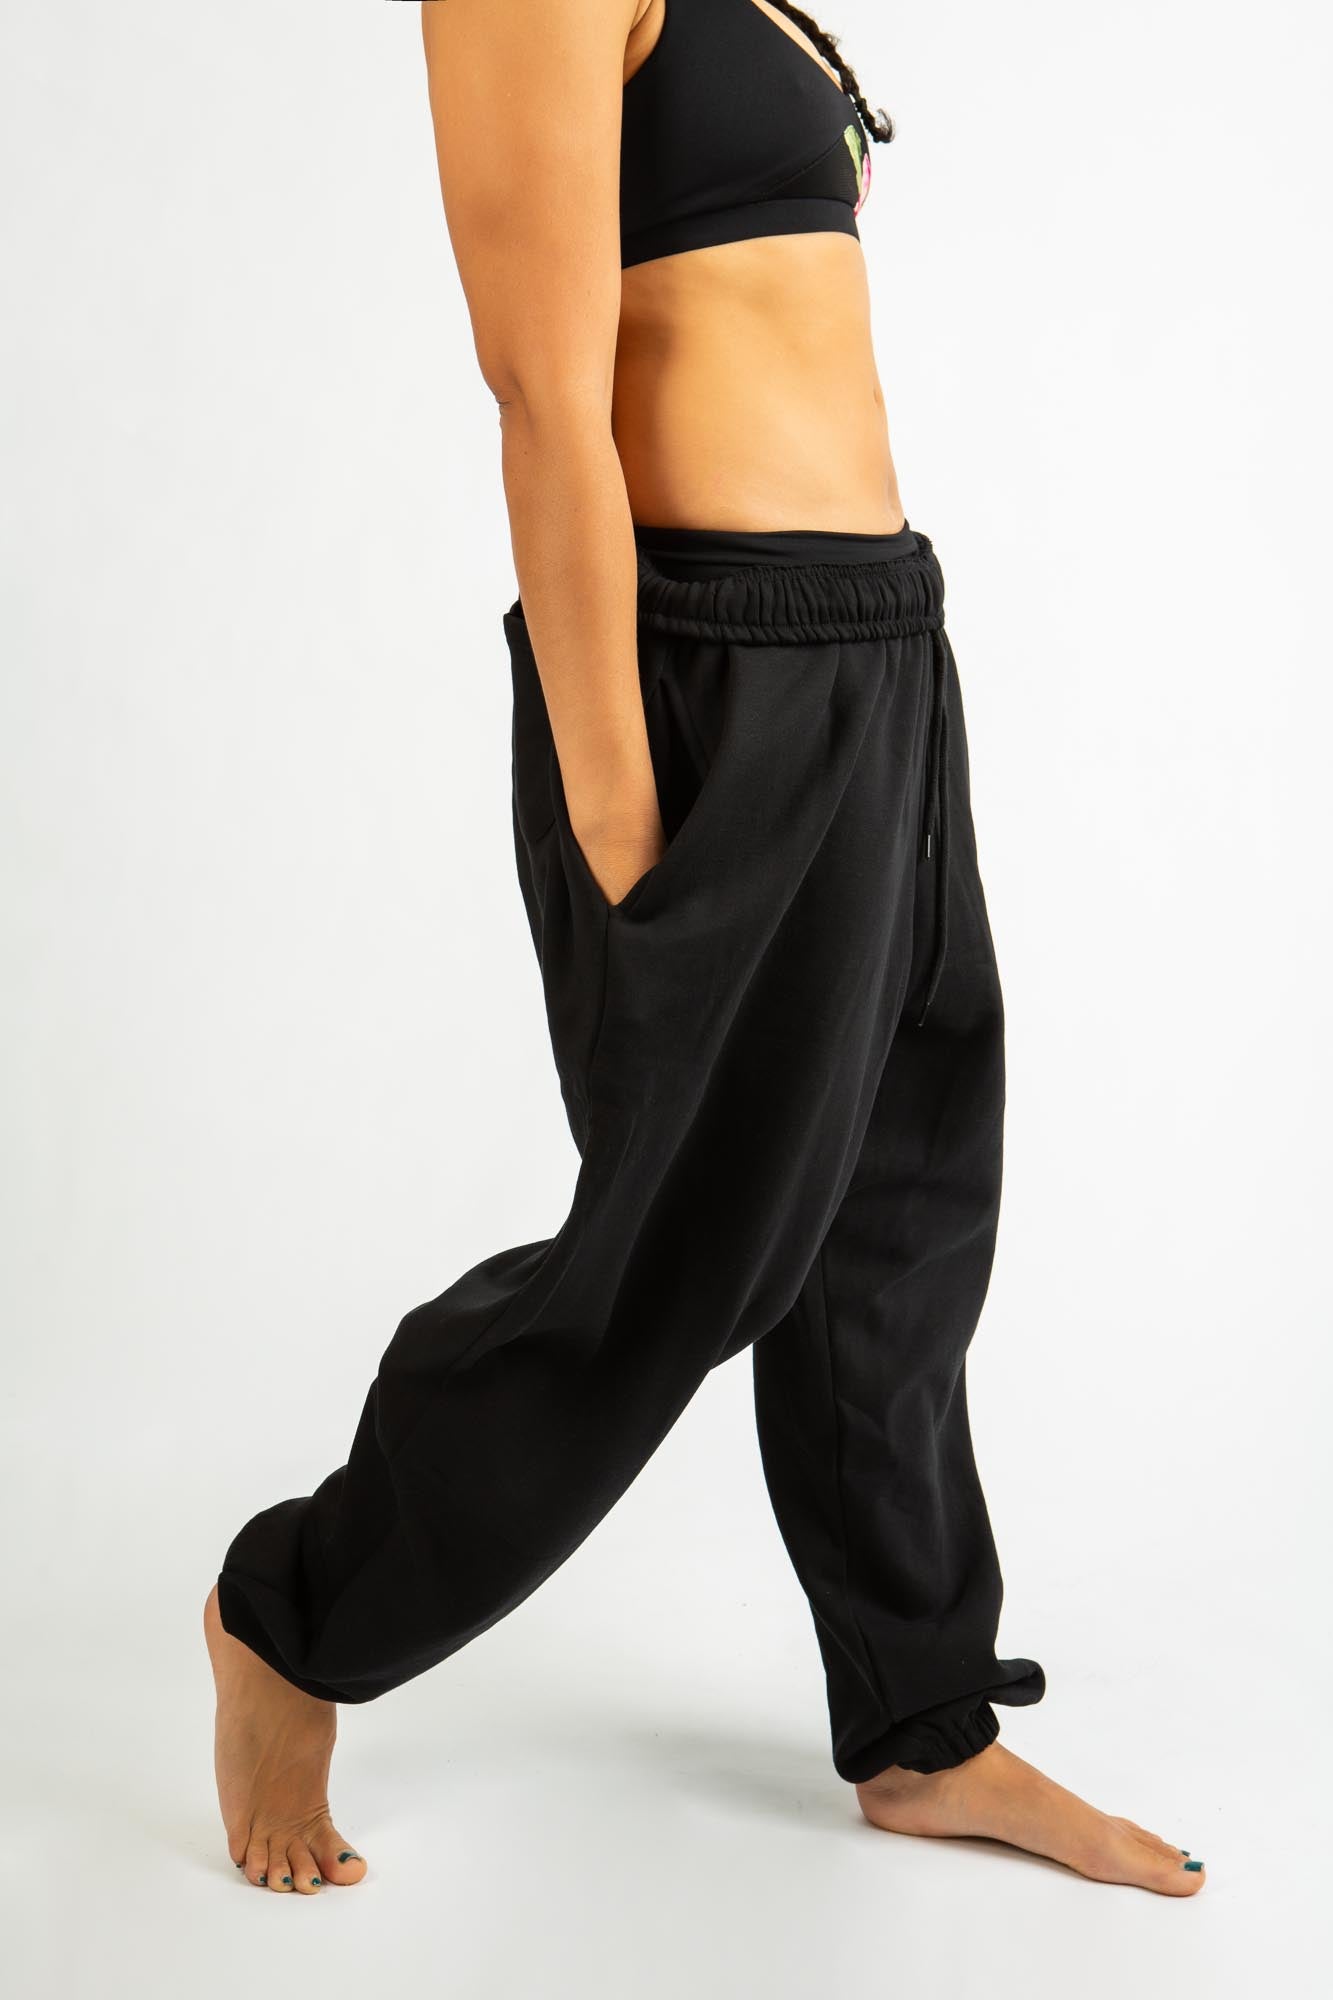 Strong Talented Passionate Human Track Pant